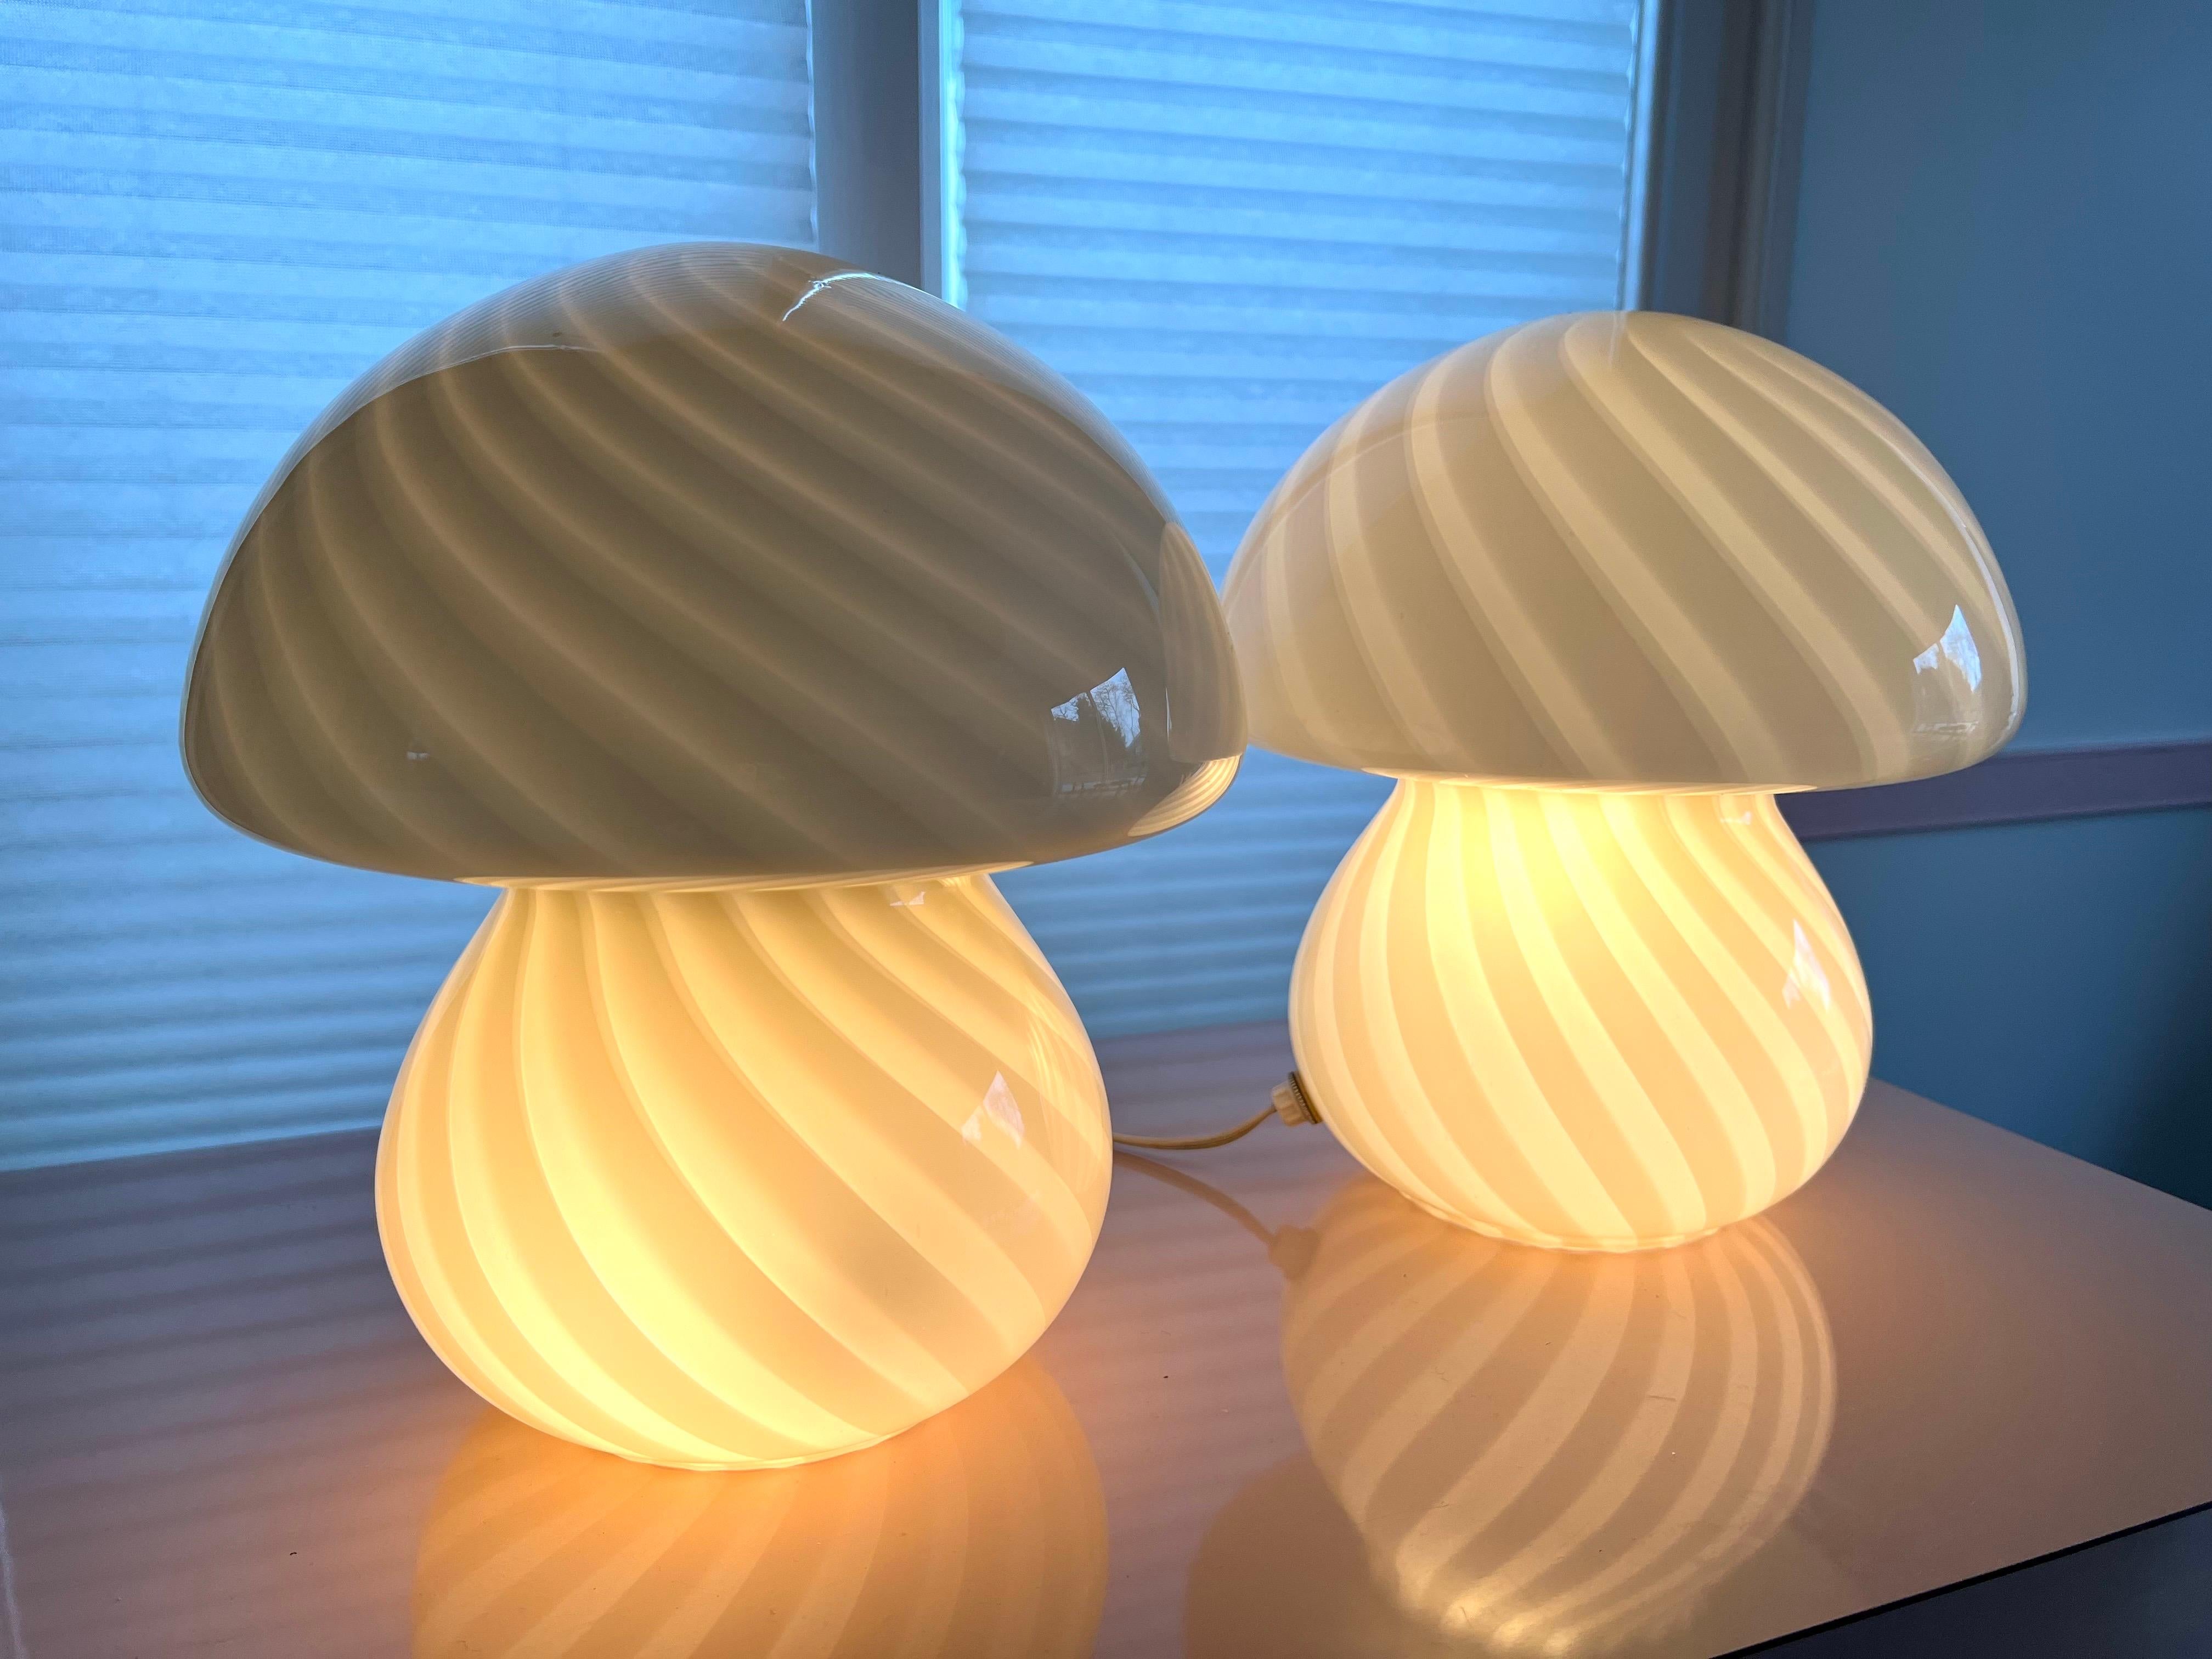 Yellow Murano Attributed Glass Mushroom Lamps - a Pair, circa 1970

They are perfect for your bedside tables or anywhere in the house. In amazing vintage condition.